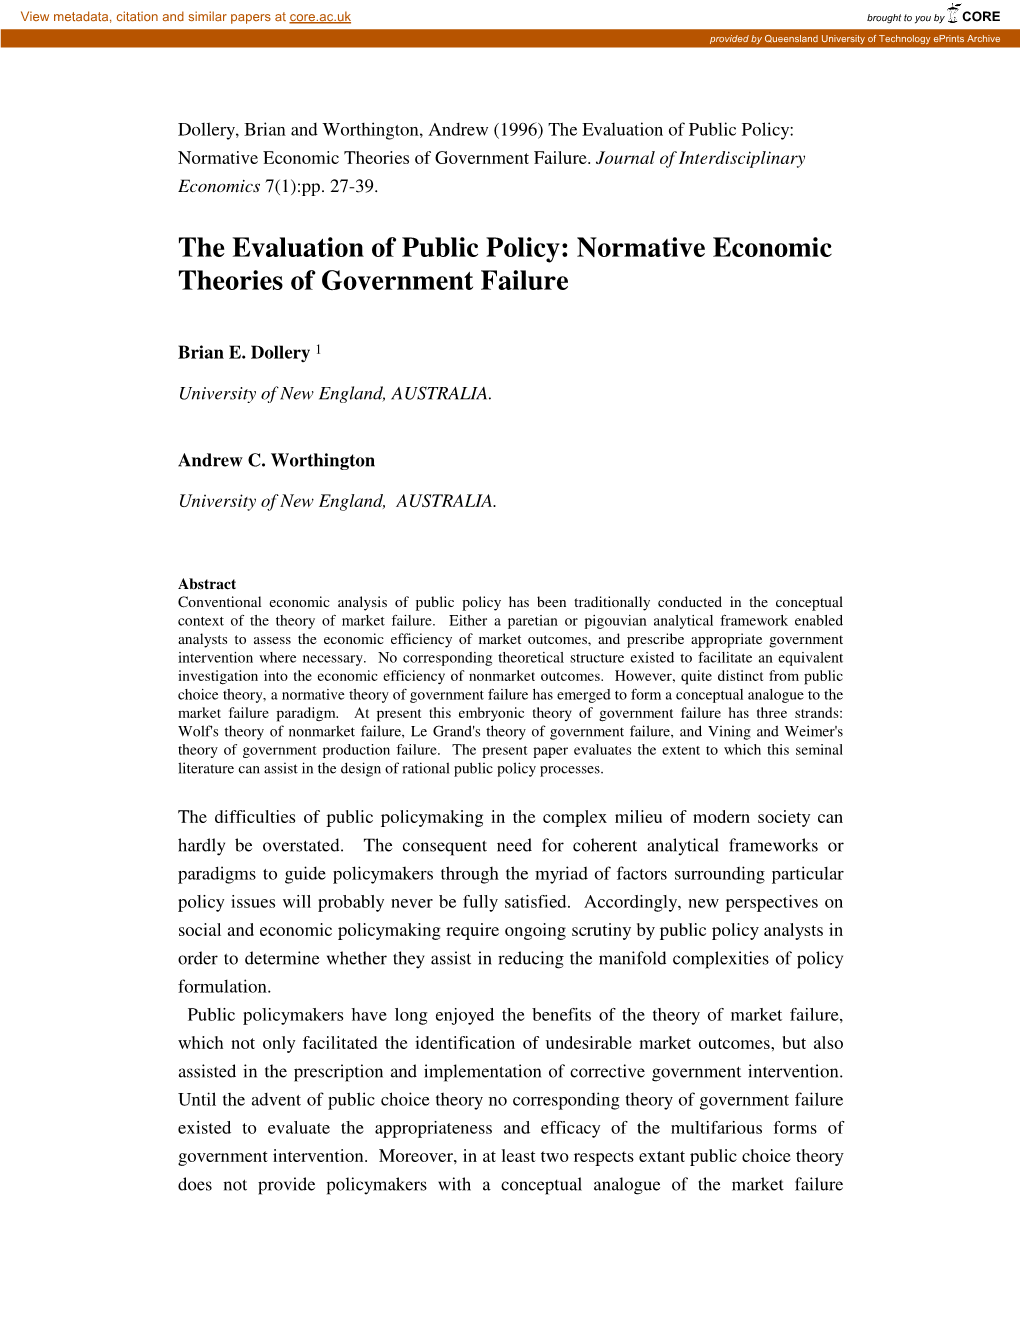 The Evaluation of Public Policy: Normative Economic Theories of Government Failure